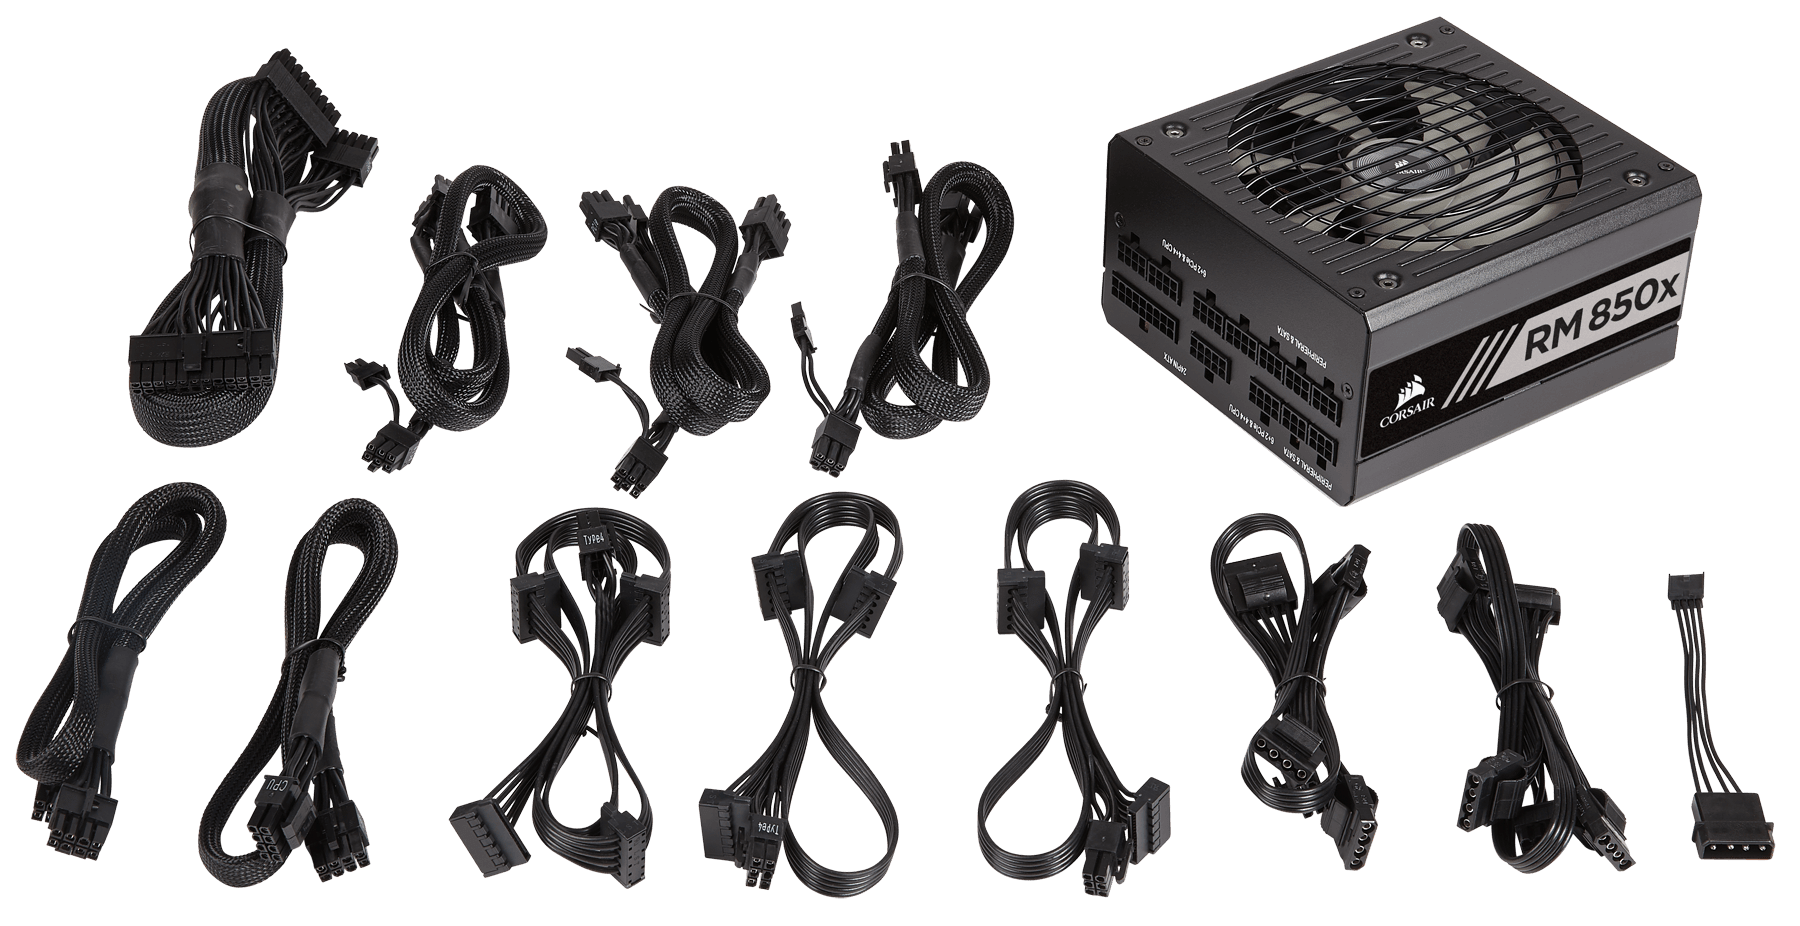 Corsair RM850x Fully Modular 850W PSU Review - PCQuest